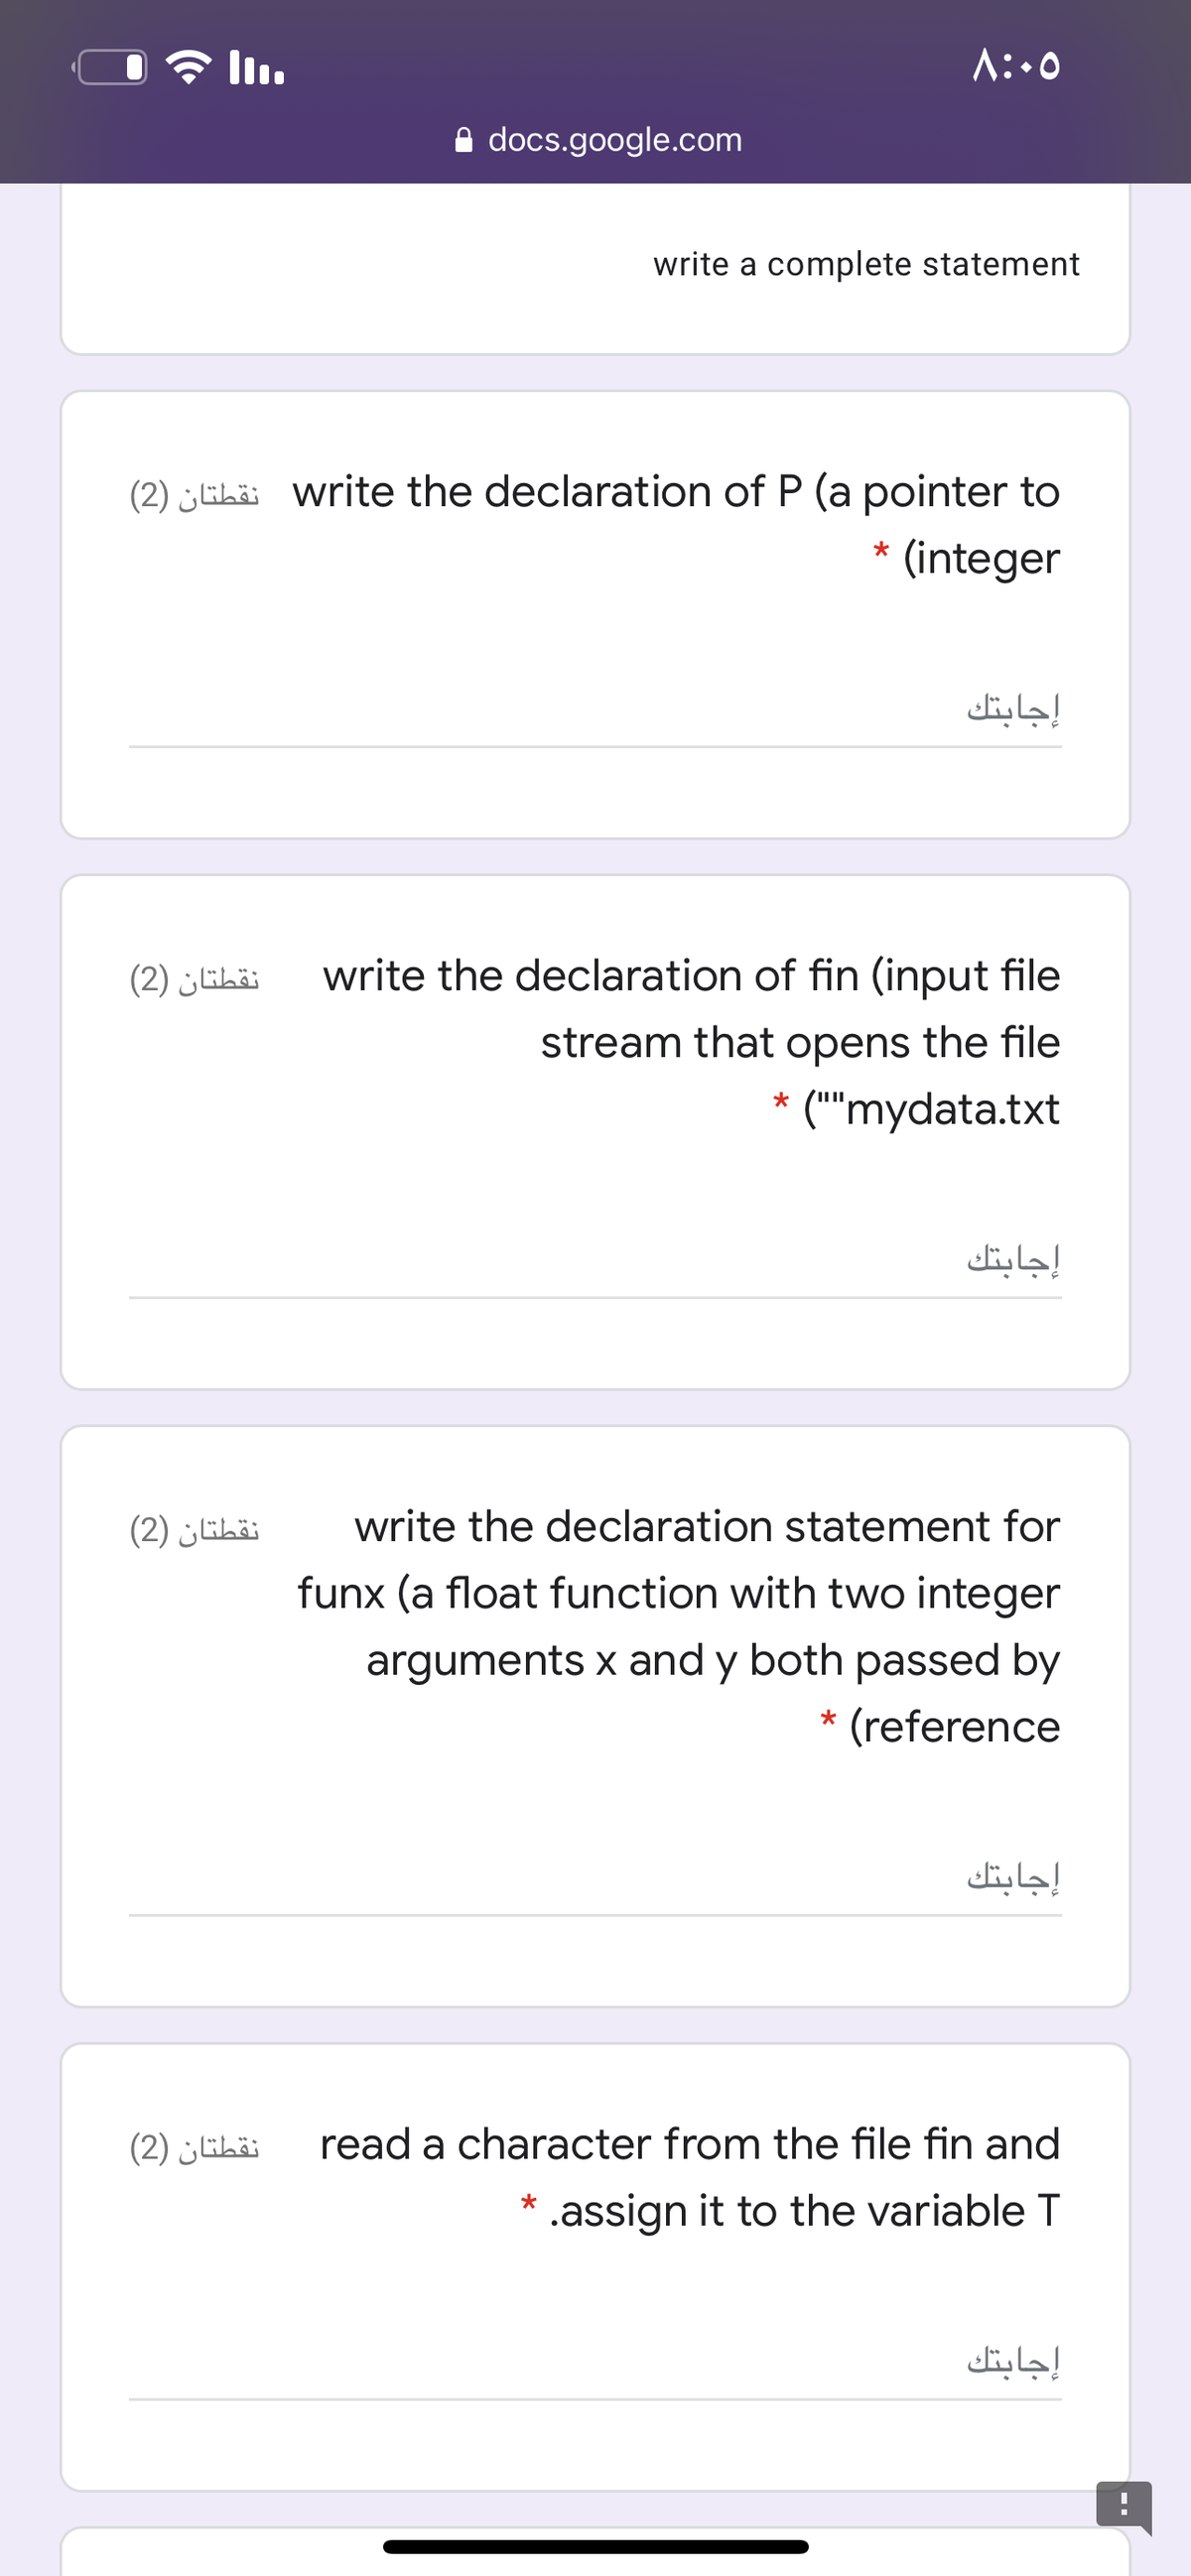 A:.0
A docs.google.com
write a complete statement
(2) „Eha: write the declaration of P (a pointer to
(integer
إجابتك
نقطتان )2(
write the declaration of fin (input file
stream that opens the file
* ("'mydata.txt
إجابتك
نقطتان )2(
write the declaration statement for
funx (a float function with two integer
arguments x and y both passed by
(reference
*
إجابتك
نقطتان )2(
read a character from the file fin and
.assign it to the variable T
إجابتك
-.
